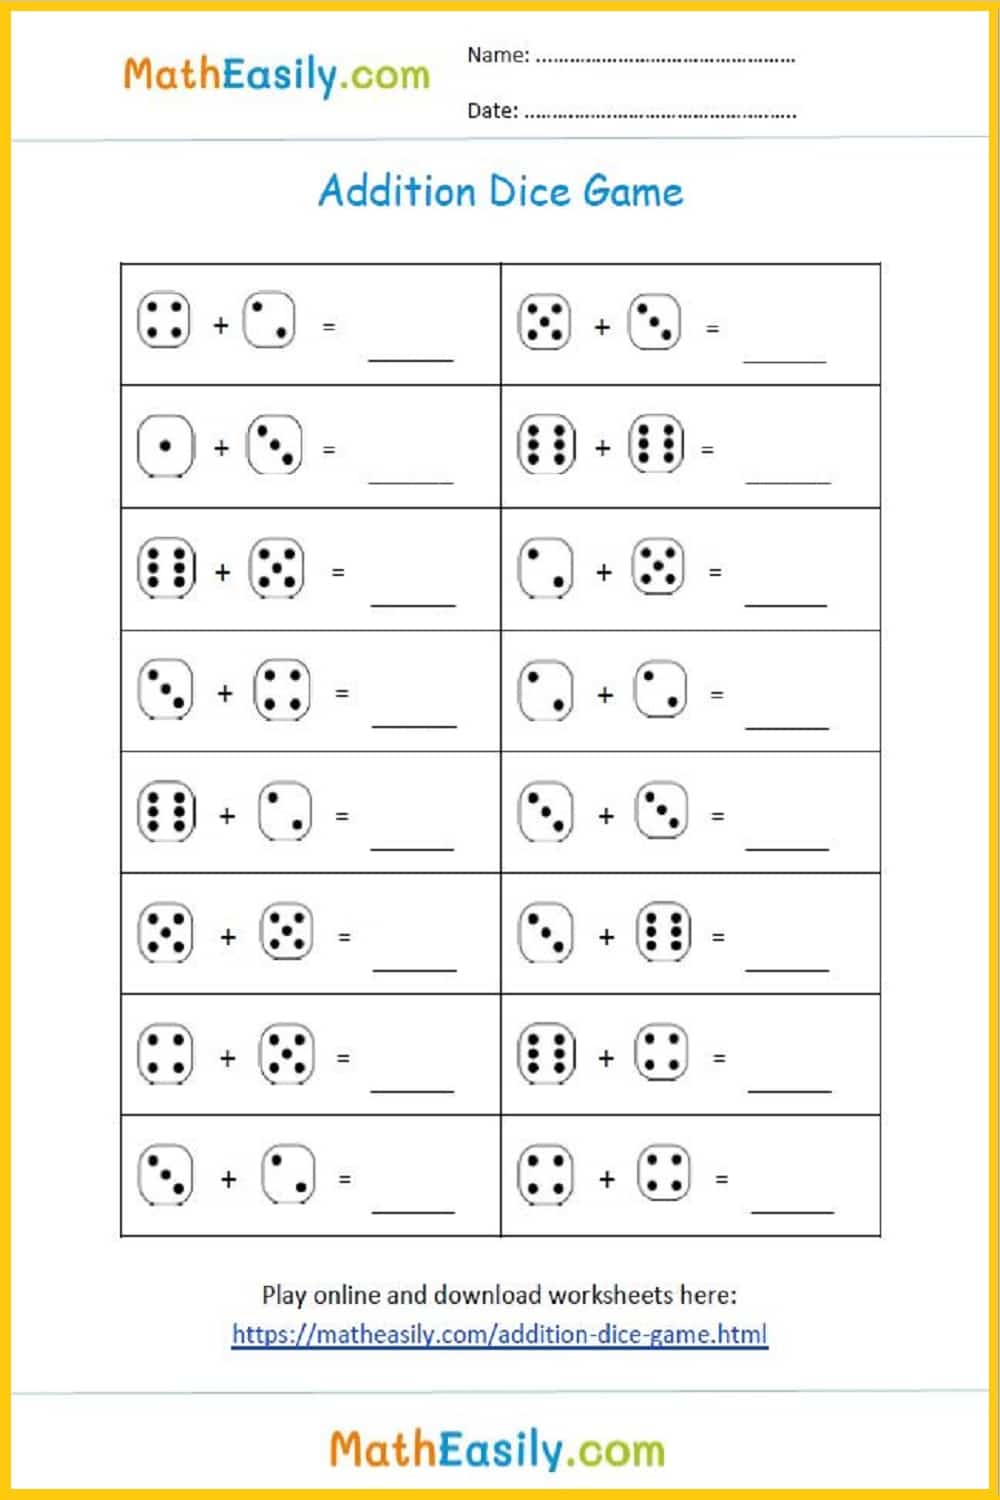 Addition dice worksheet: Download our free printable dice addition worksheet in PDF. dice addition worksheet free. addition dice game worksheet